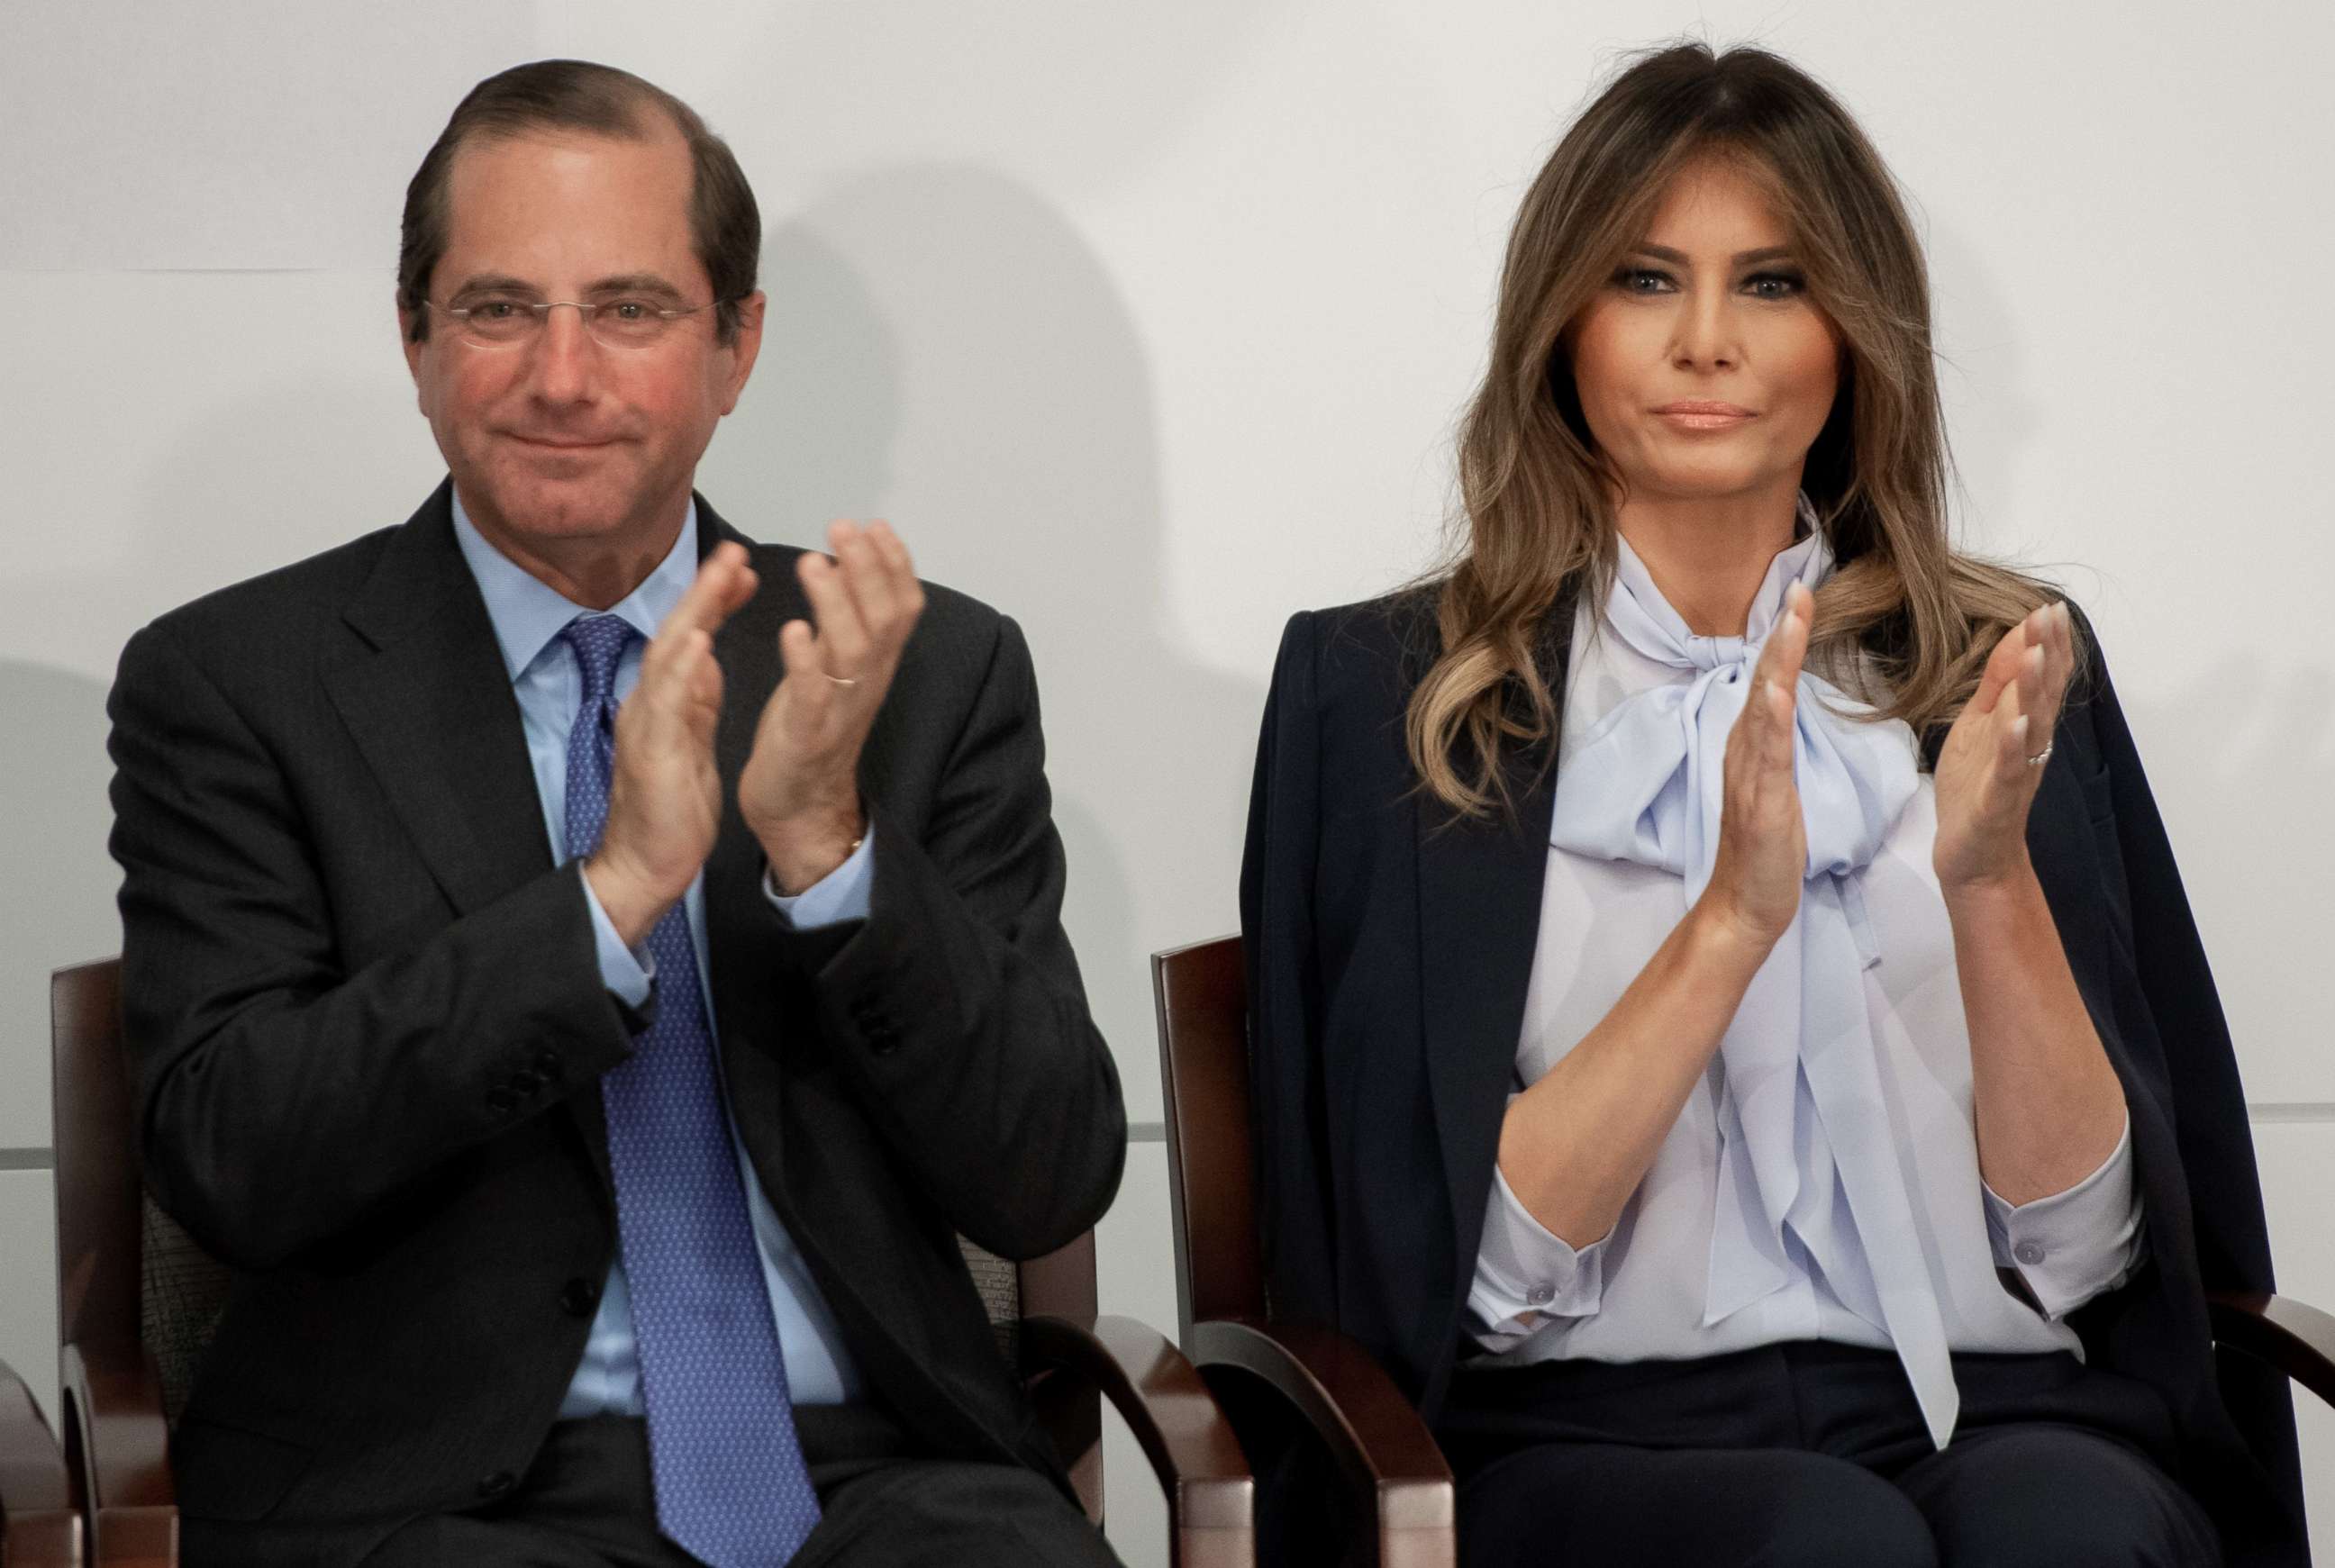 PHOTO: First Lady Melania Trump applauds as she arrives alongside US Secretary of Health and Human Services Alex Azar, left, during the Federal Partners in Bullying Prevention (FPBP) Cyberbullying Prevention Summit in Rockville, Maryland, Aug. 20, 2018.